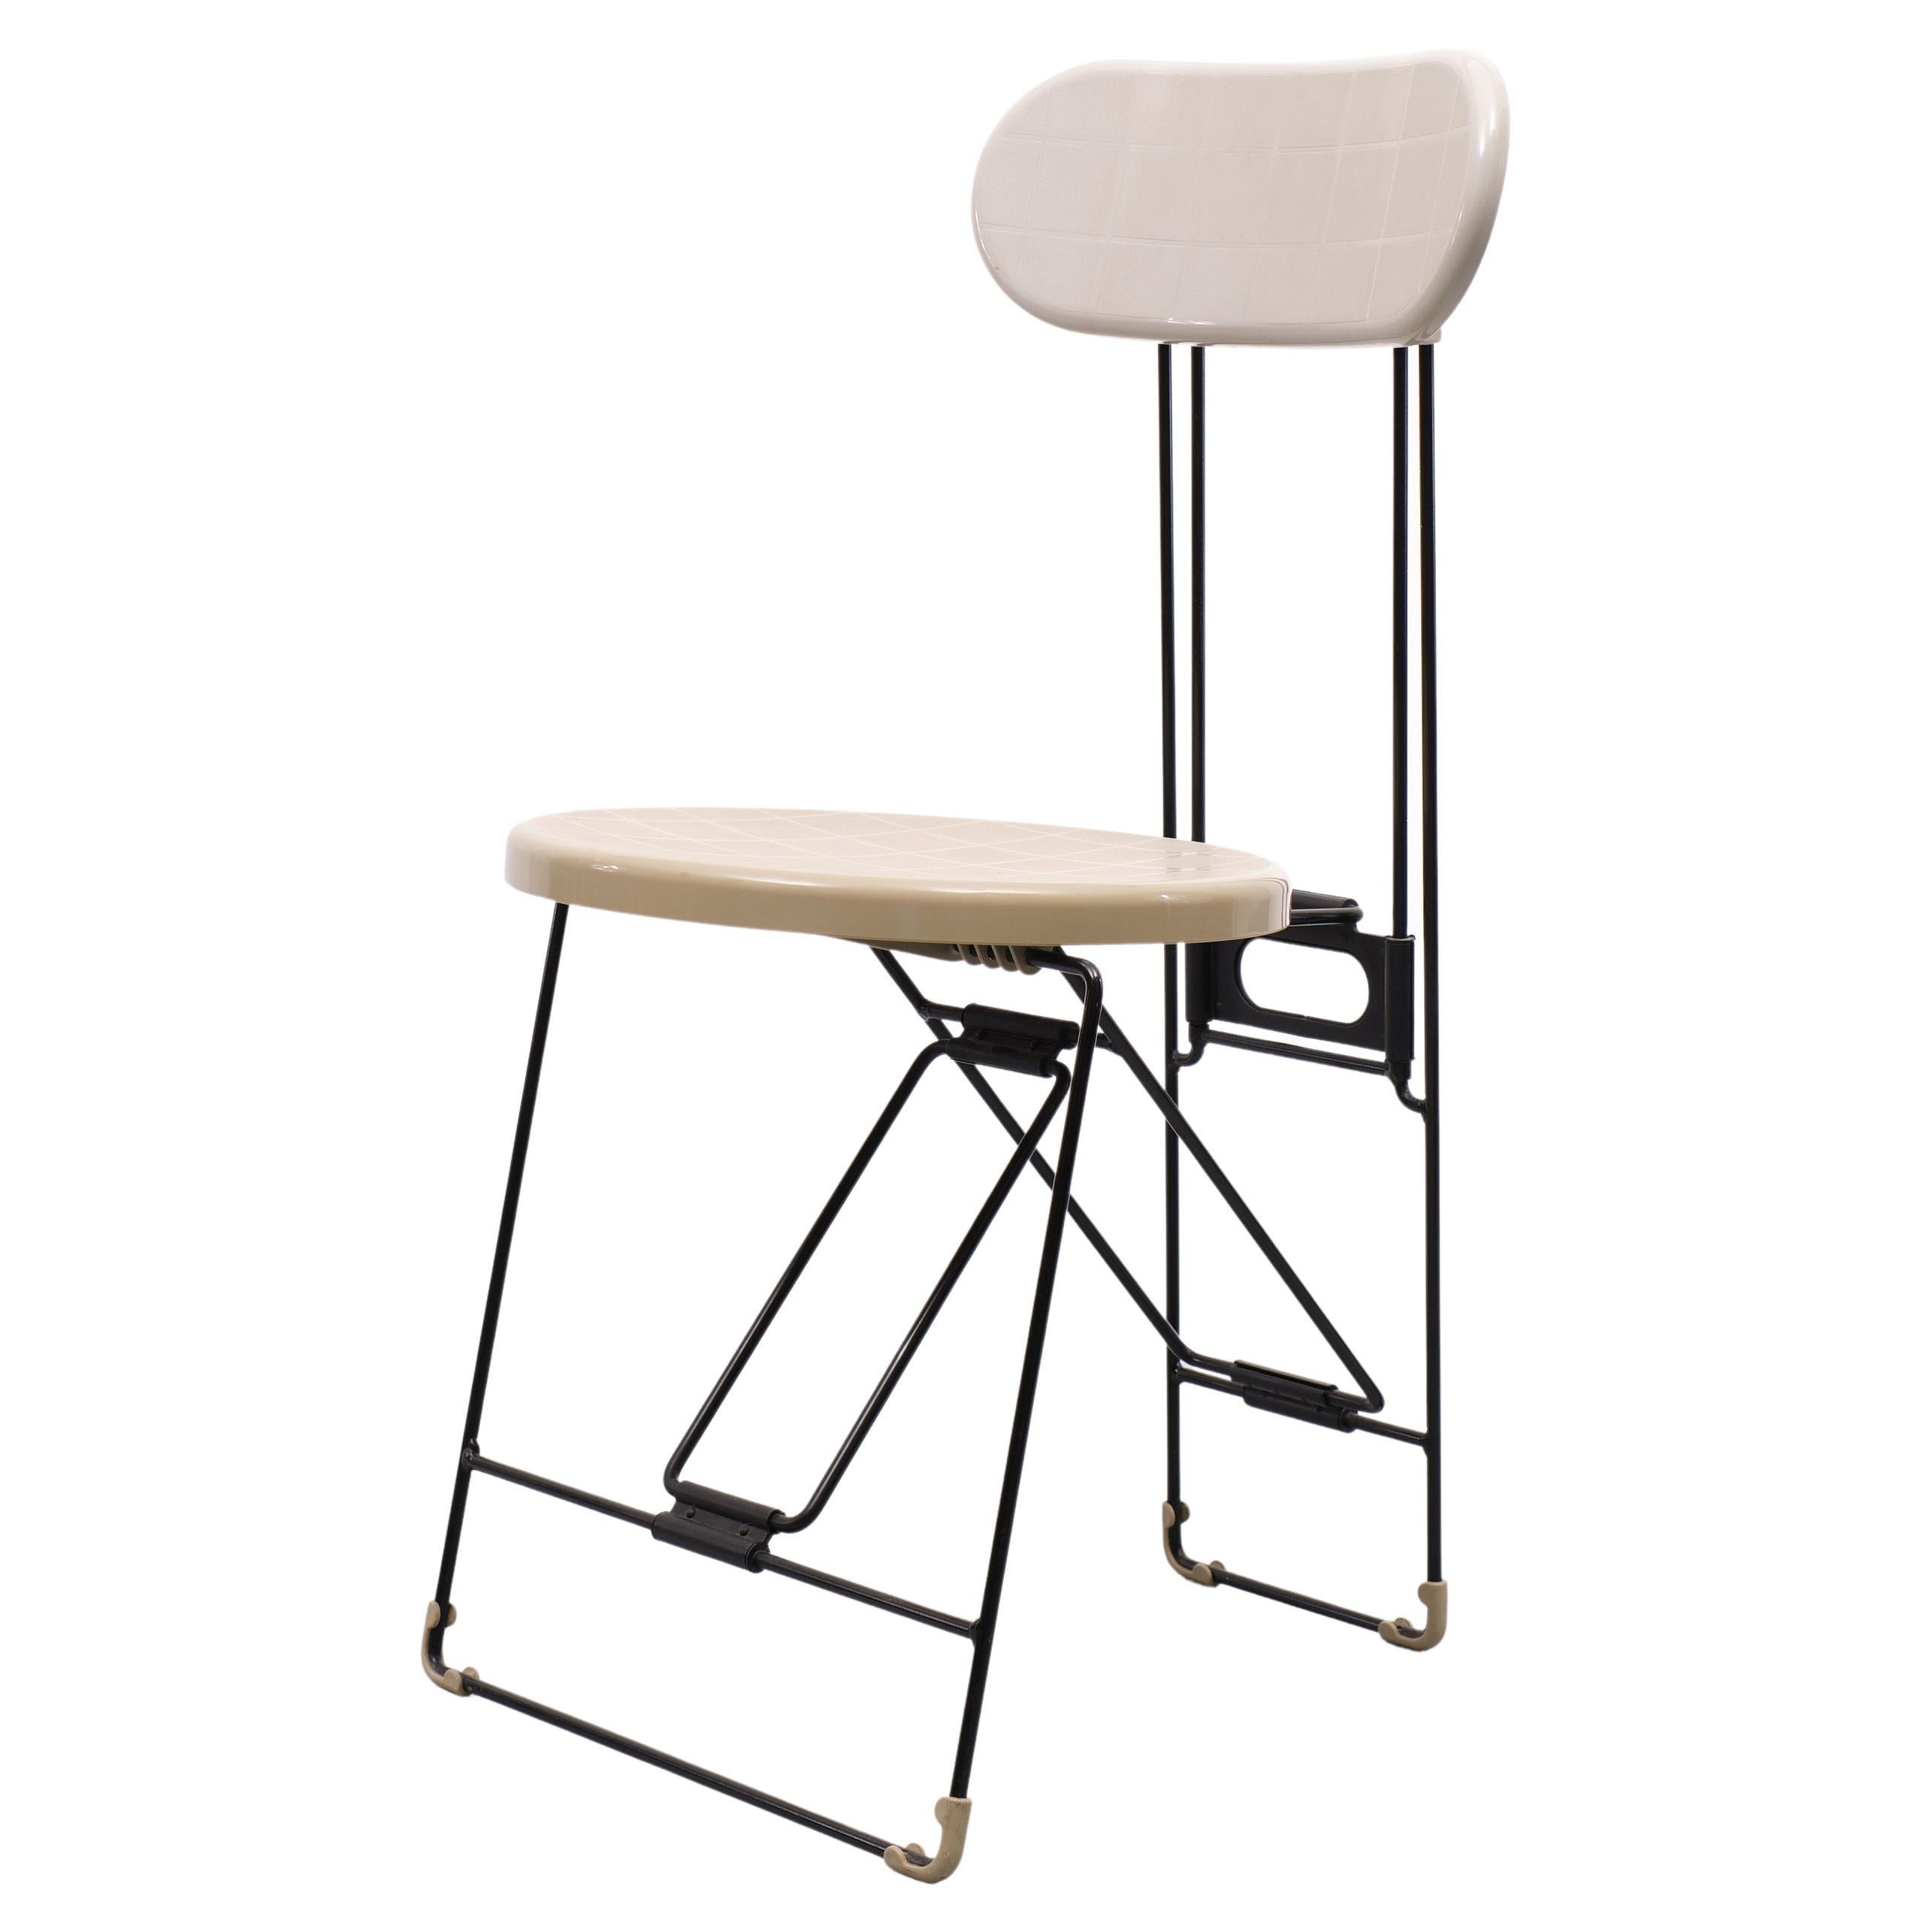 Andries Van Onck Post Modern Folding Chair, 1984 For Sale